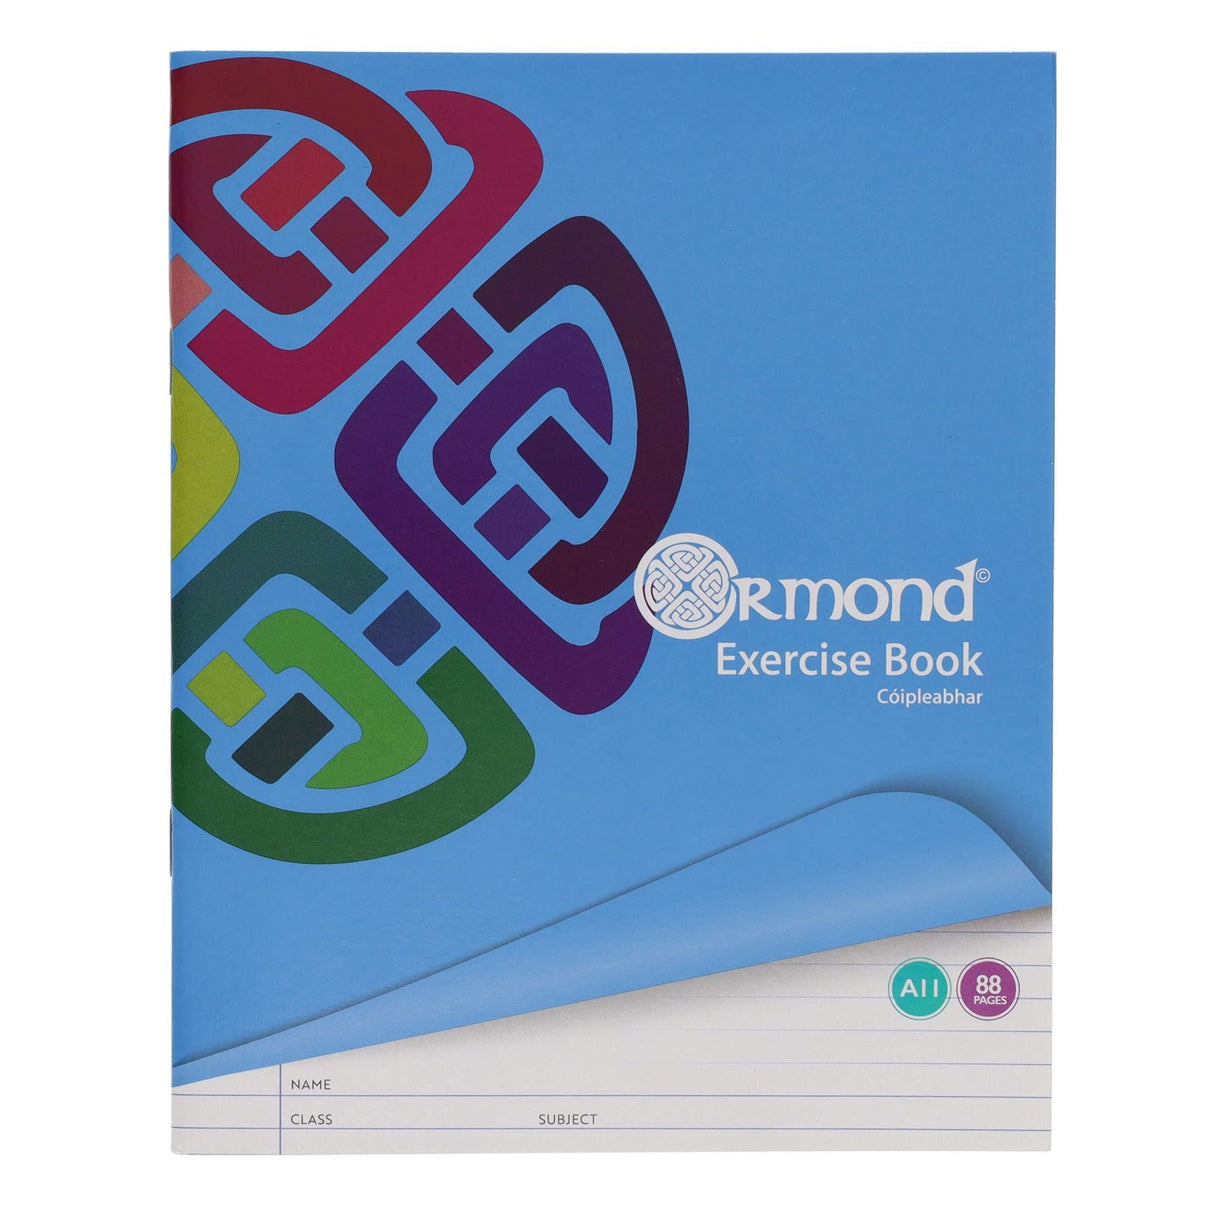 Ormond Multipack | A11 Exercise Book - Margin Ruled - 88 Pages - Pack of 10-Exercise Books-Ormond|StationeryShop.co.uk